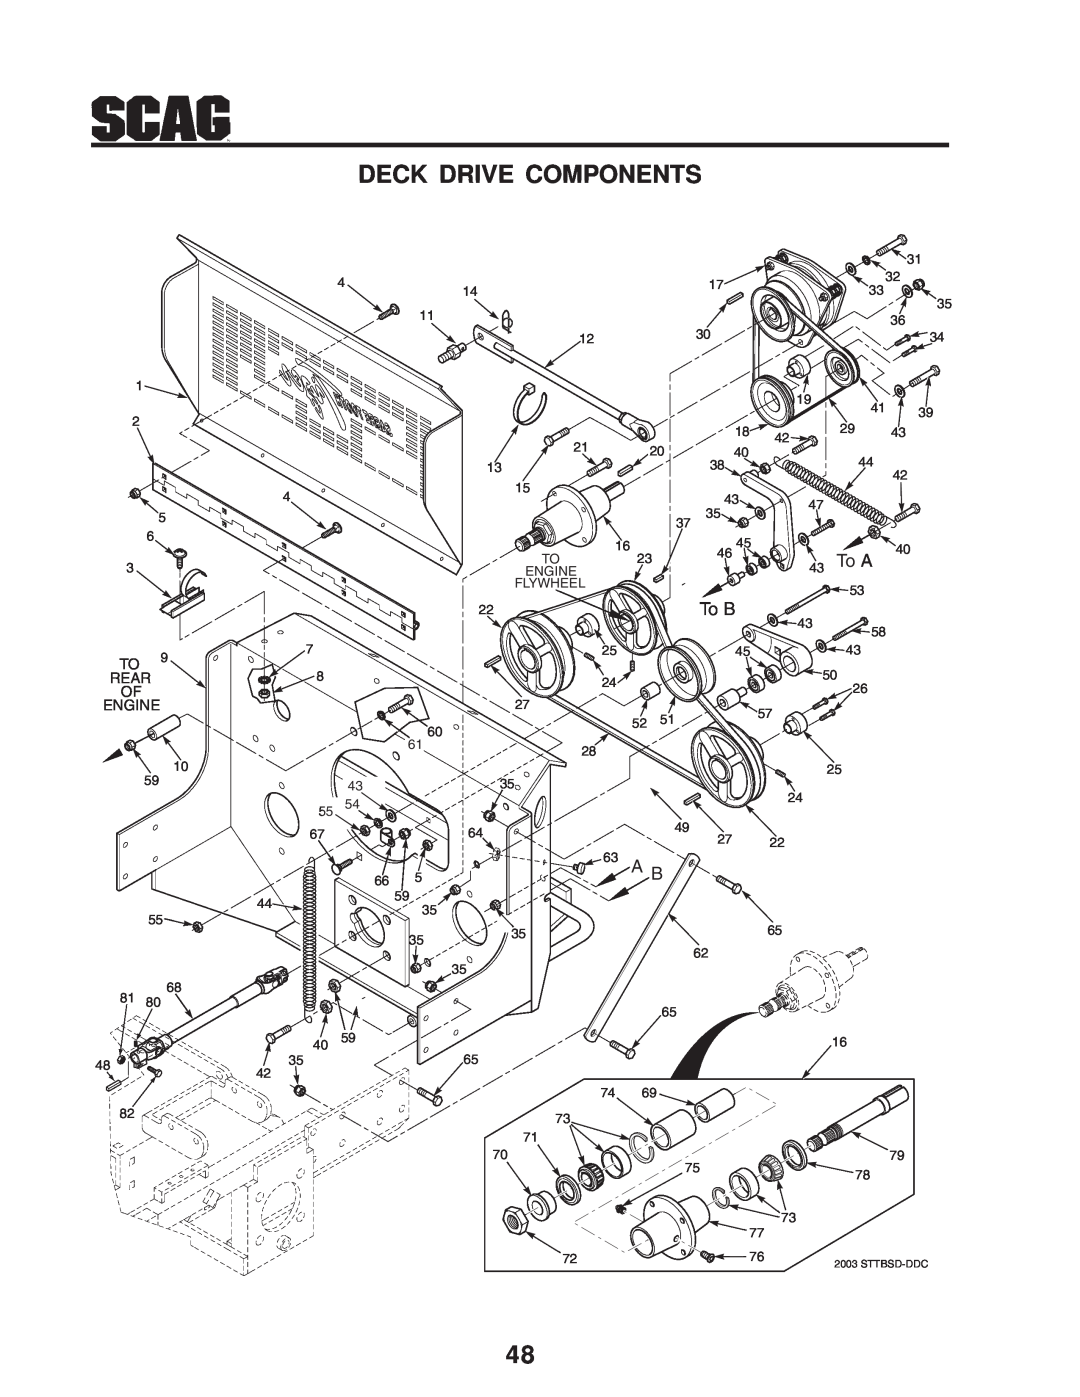 Scag Power Equipment STT-31BSD manual Deck Drive Components, To A, To B, Engine, Flywheel, Sttbsd-Ddc 